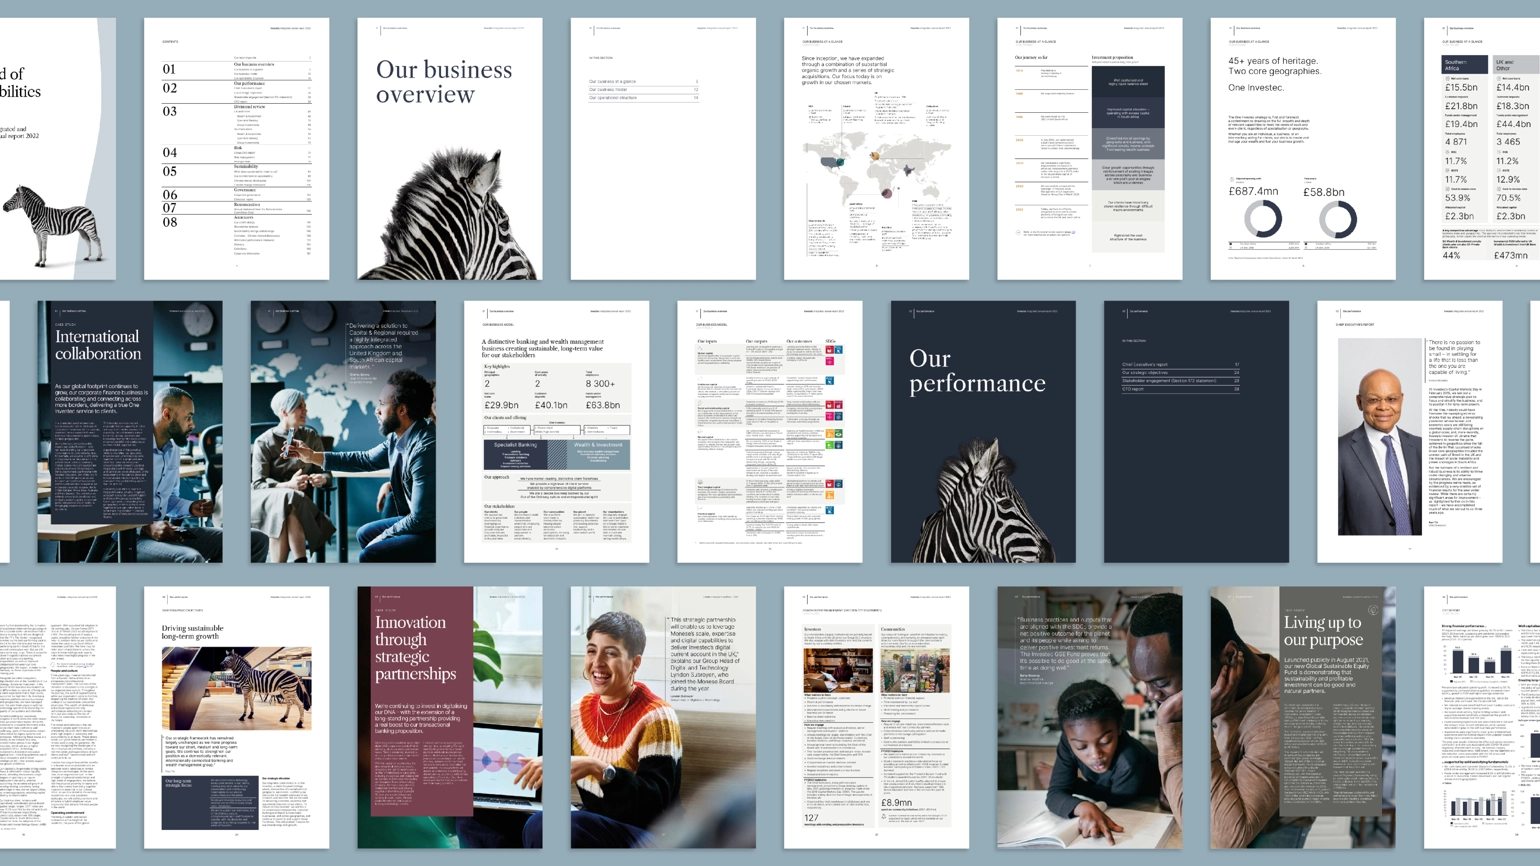 The example of many pages within Investec's 2022 annual report 